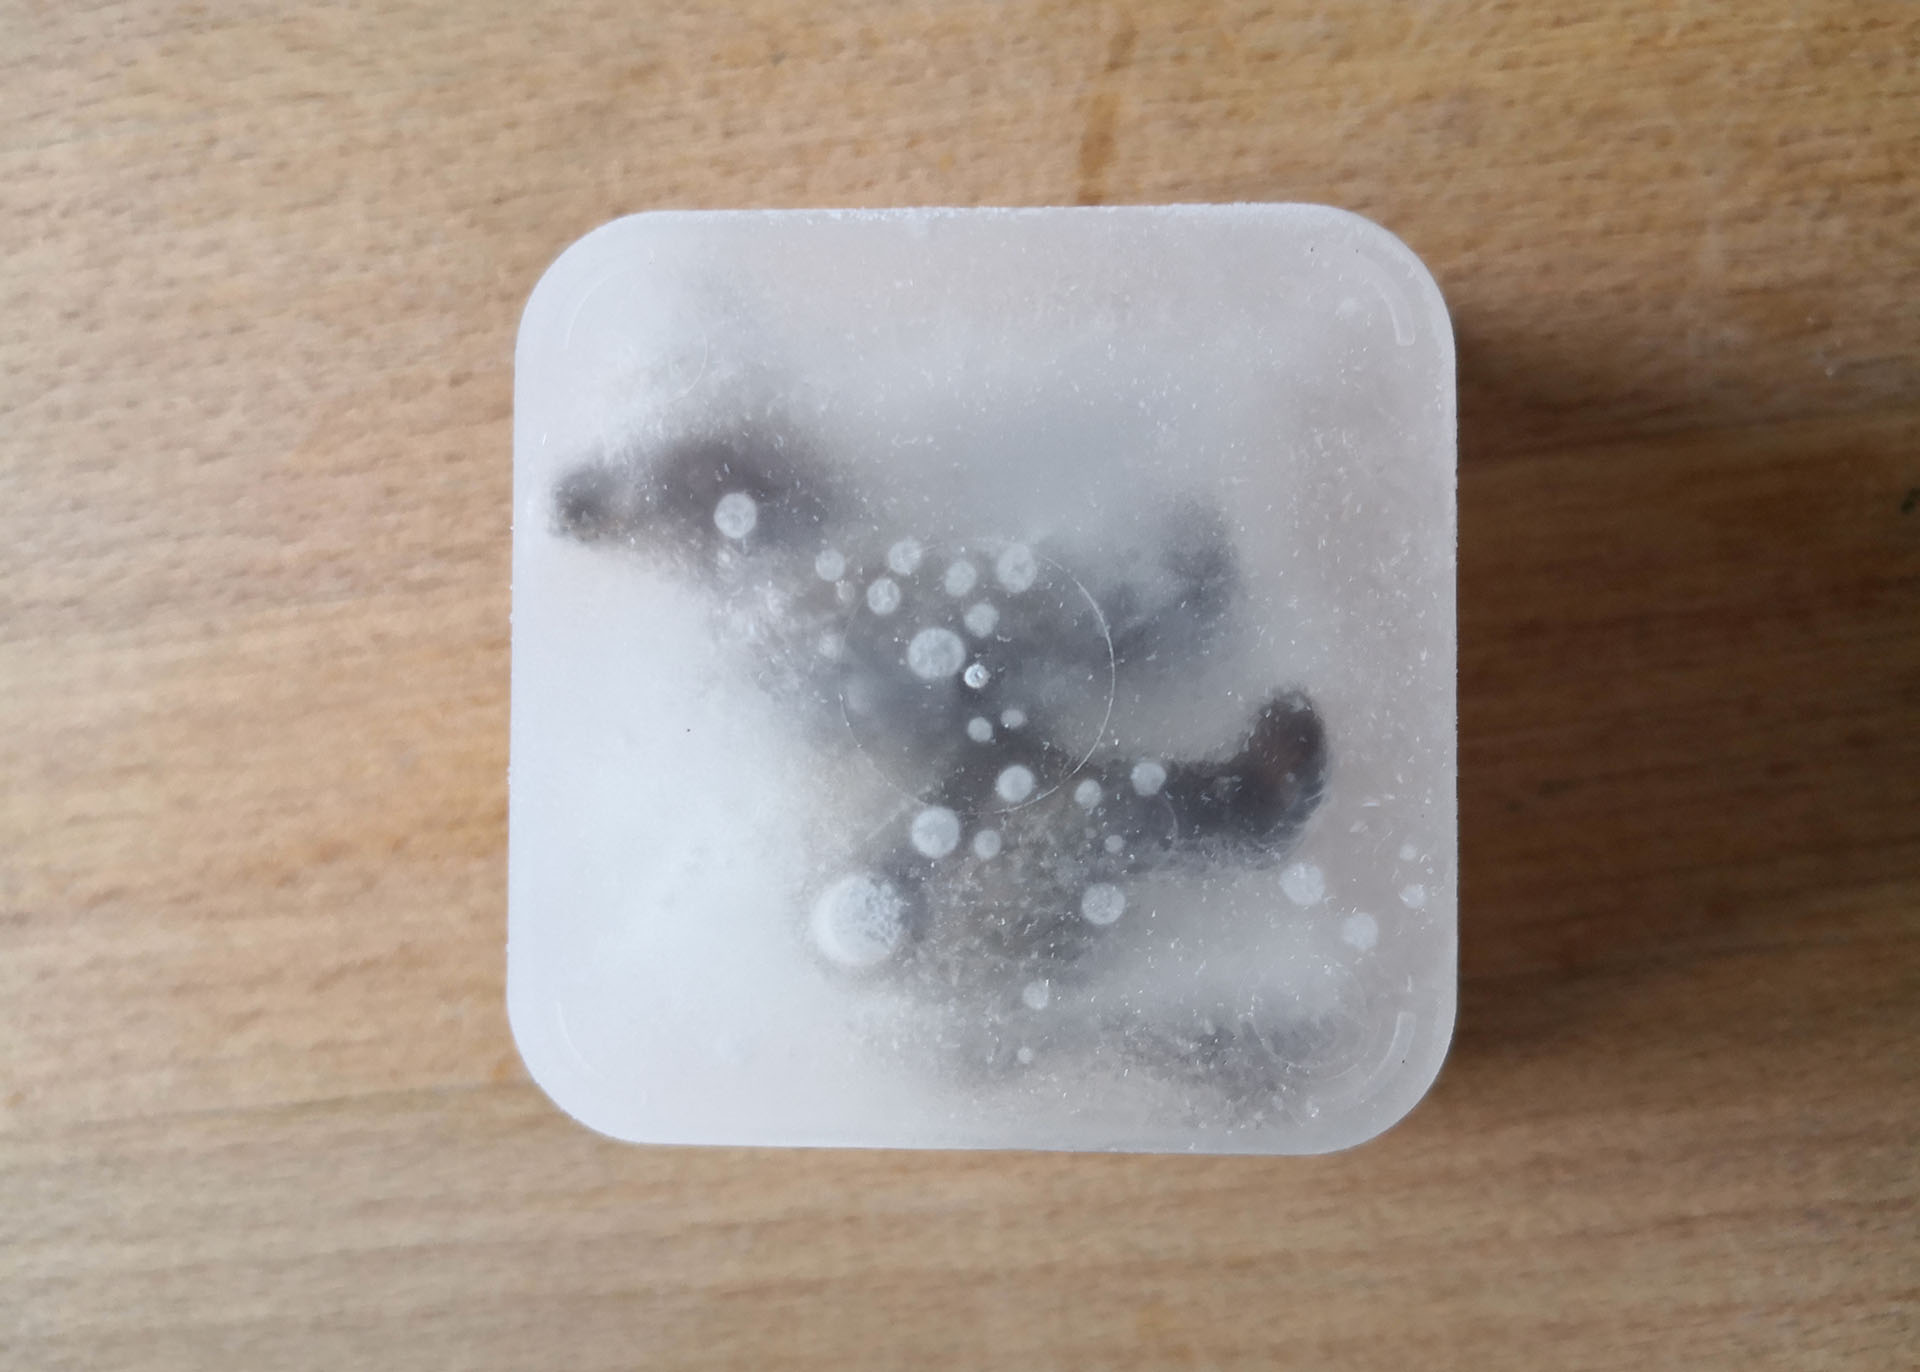 on a piece of wood there sits a frozen ice cube with some figure that looks like it could be an animal inside